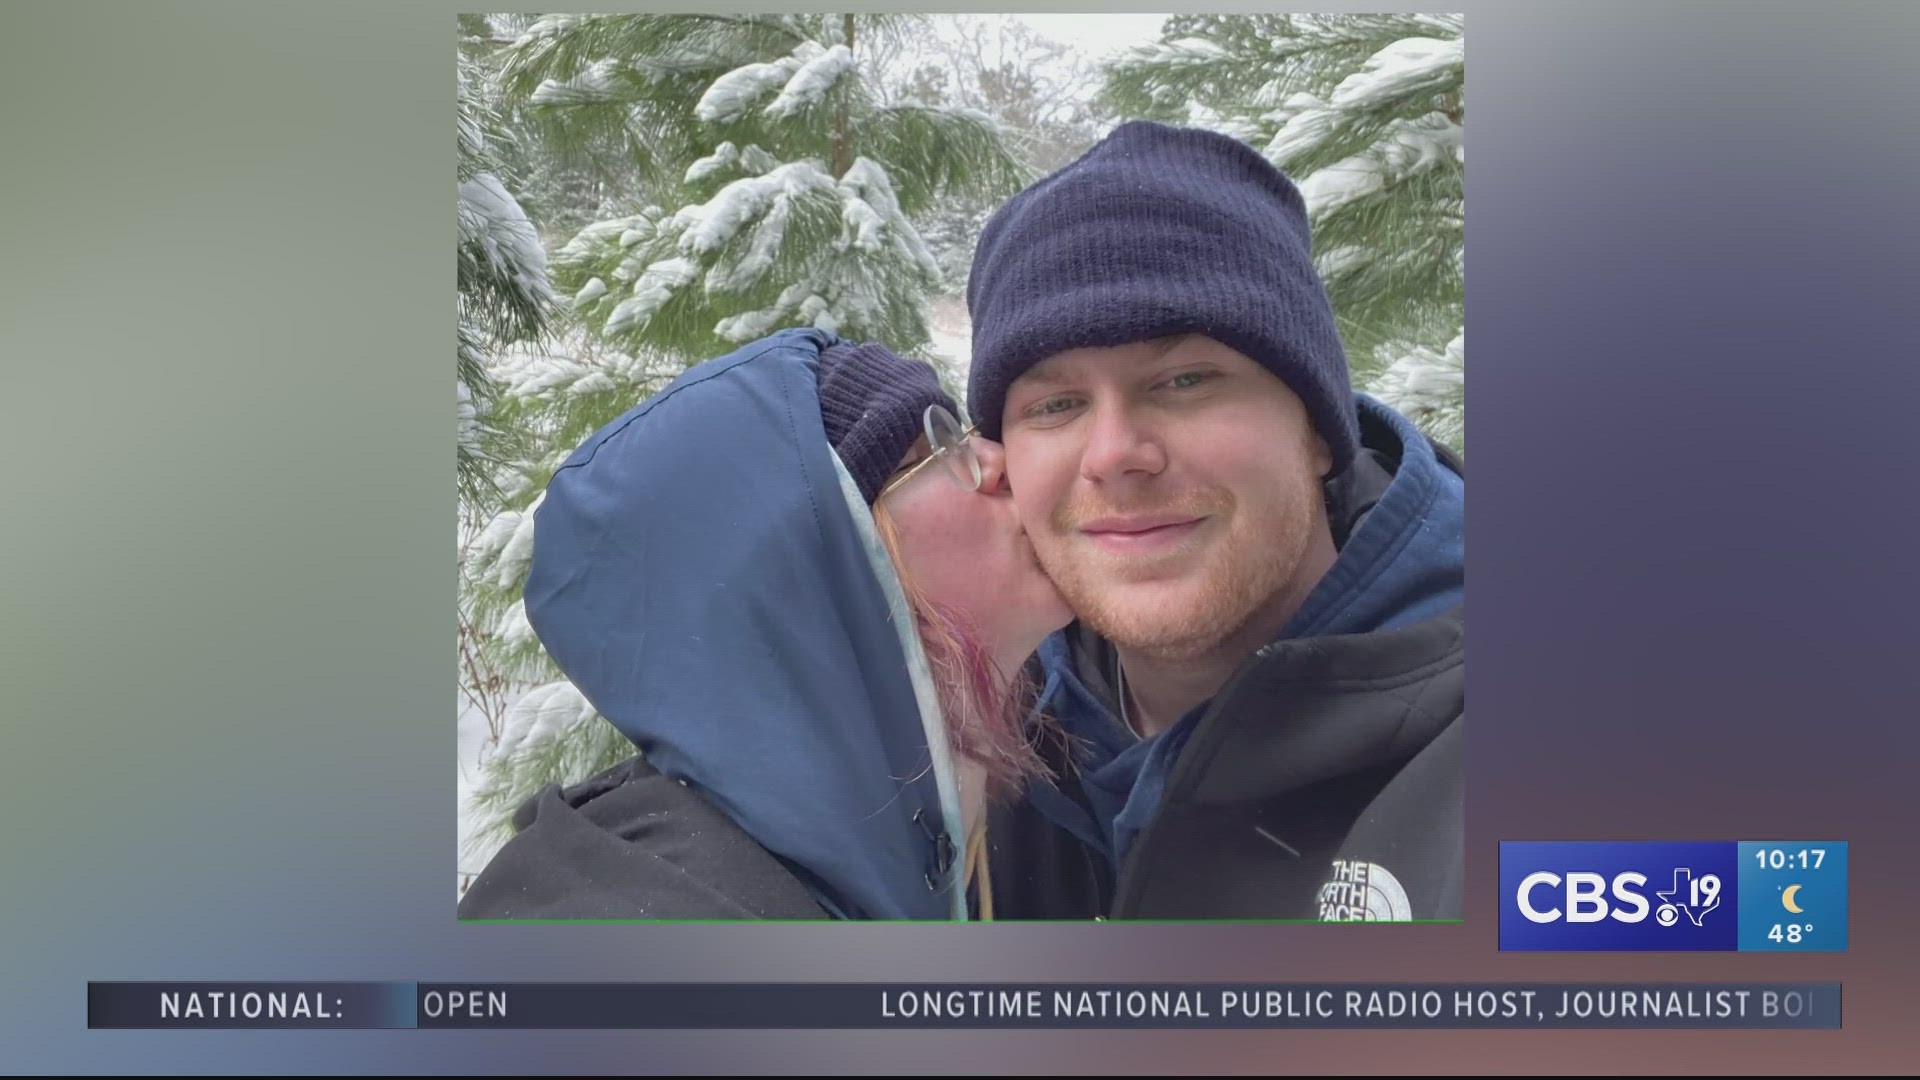 SNOWED-IN: 2021 Romance becomes wedded bliss for East Texas couple